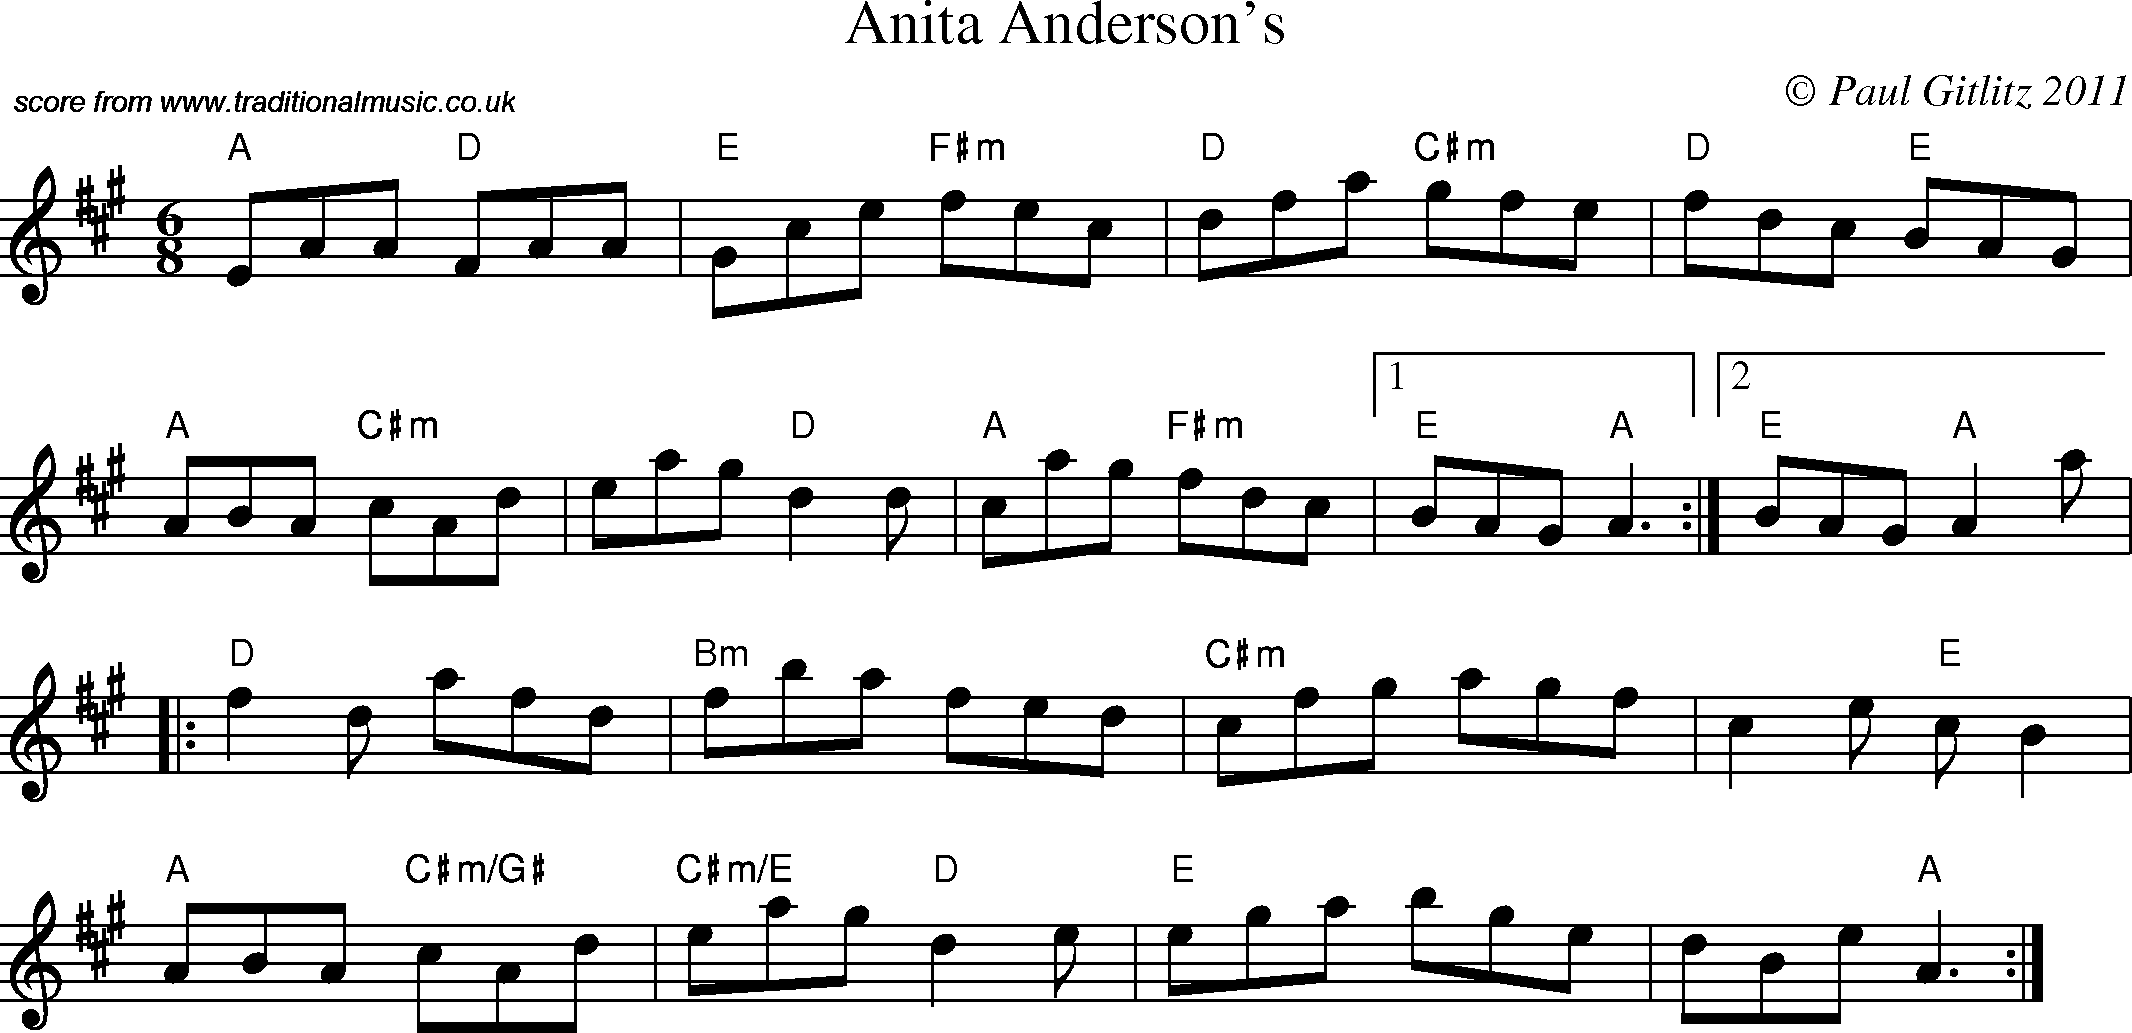 Sheet Music Score for Jig - Anita Anderson's